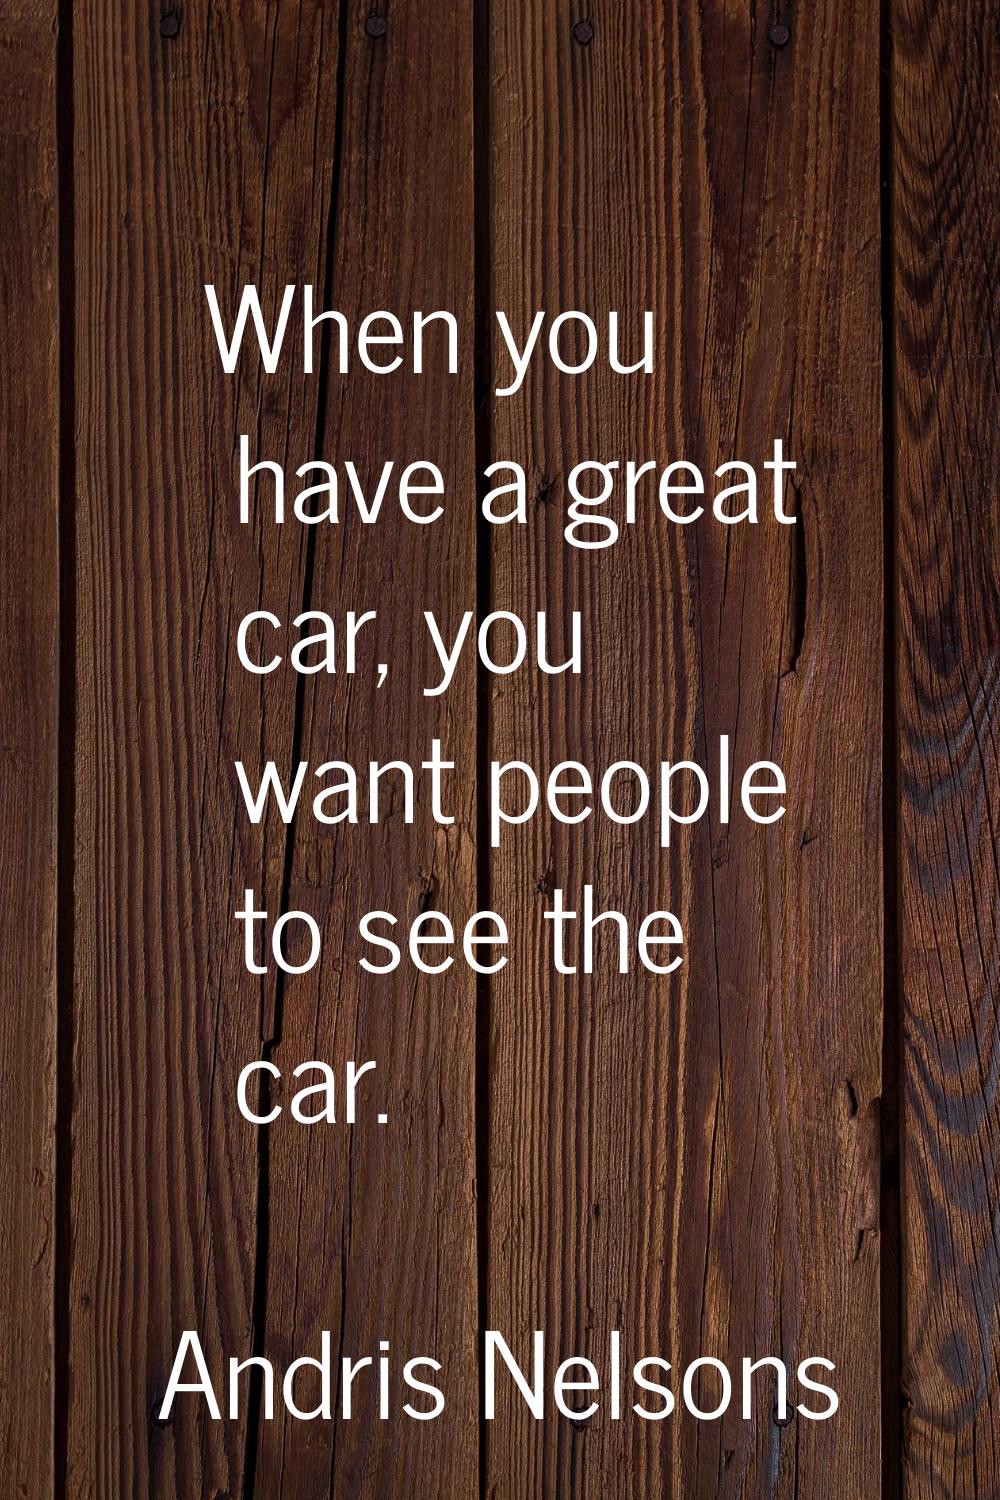 When you have a great car, you want people to see the car.